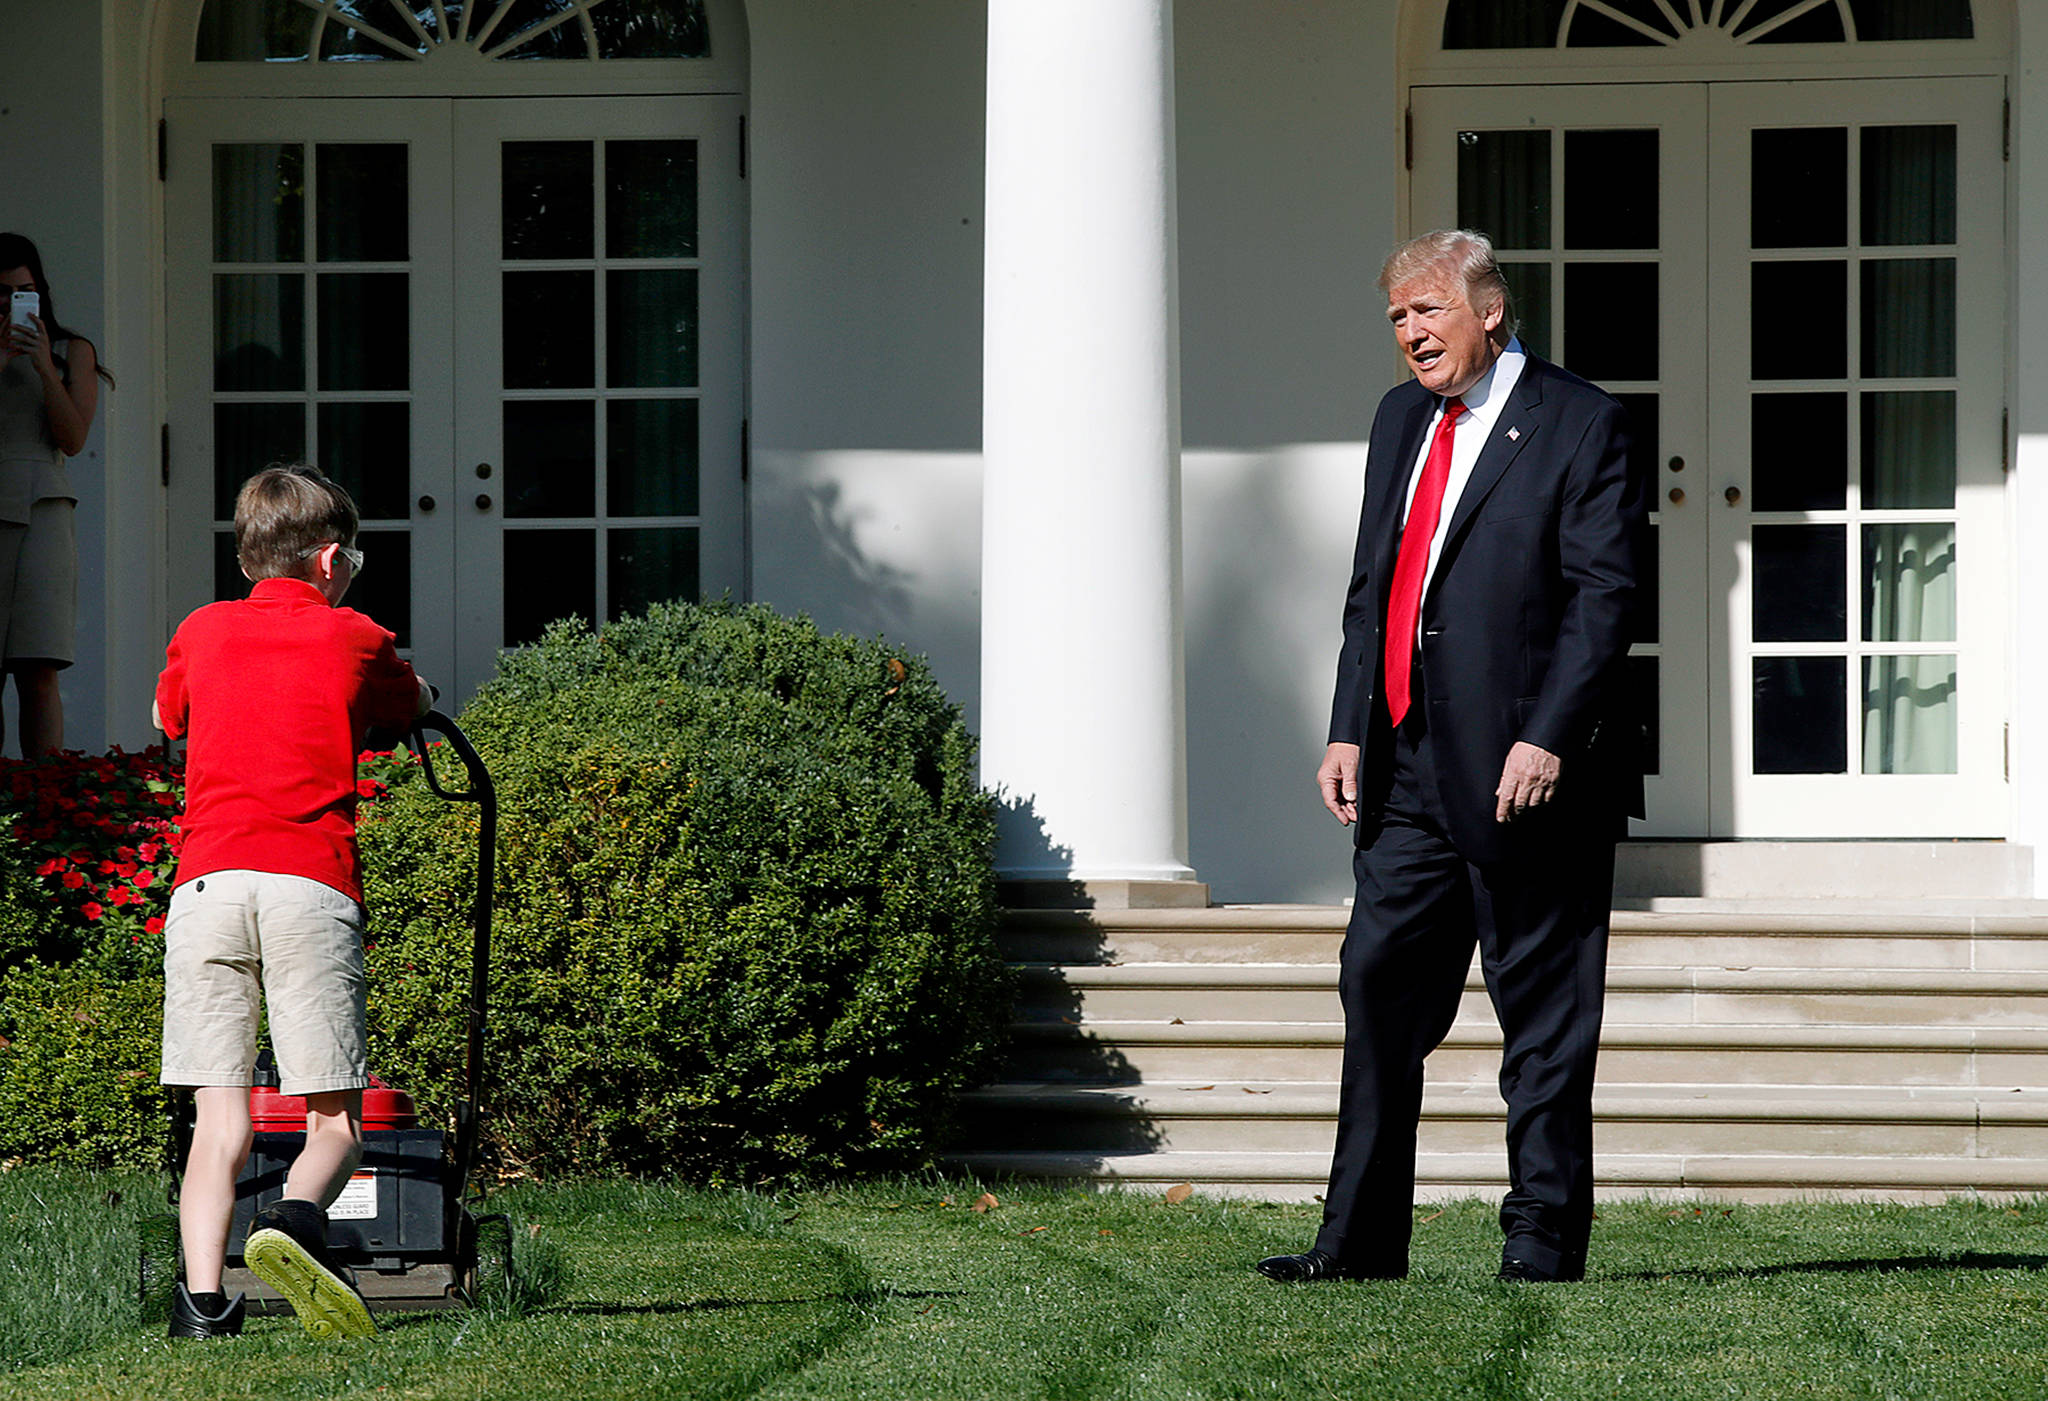 Frank Giaccio, 11, of Falls Church, Virginia, is surprised by President Donald Trump on Friday as he mows the lawn of the Rose Garden at the White House in Washington. The 11-year-old was focused on the job at hand and didn’t notice the president until he was right next to him. (AP Photo/Jacquelyn Martin)